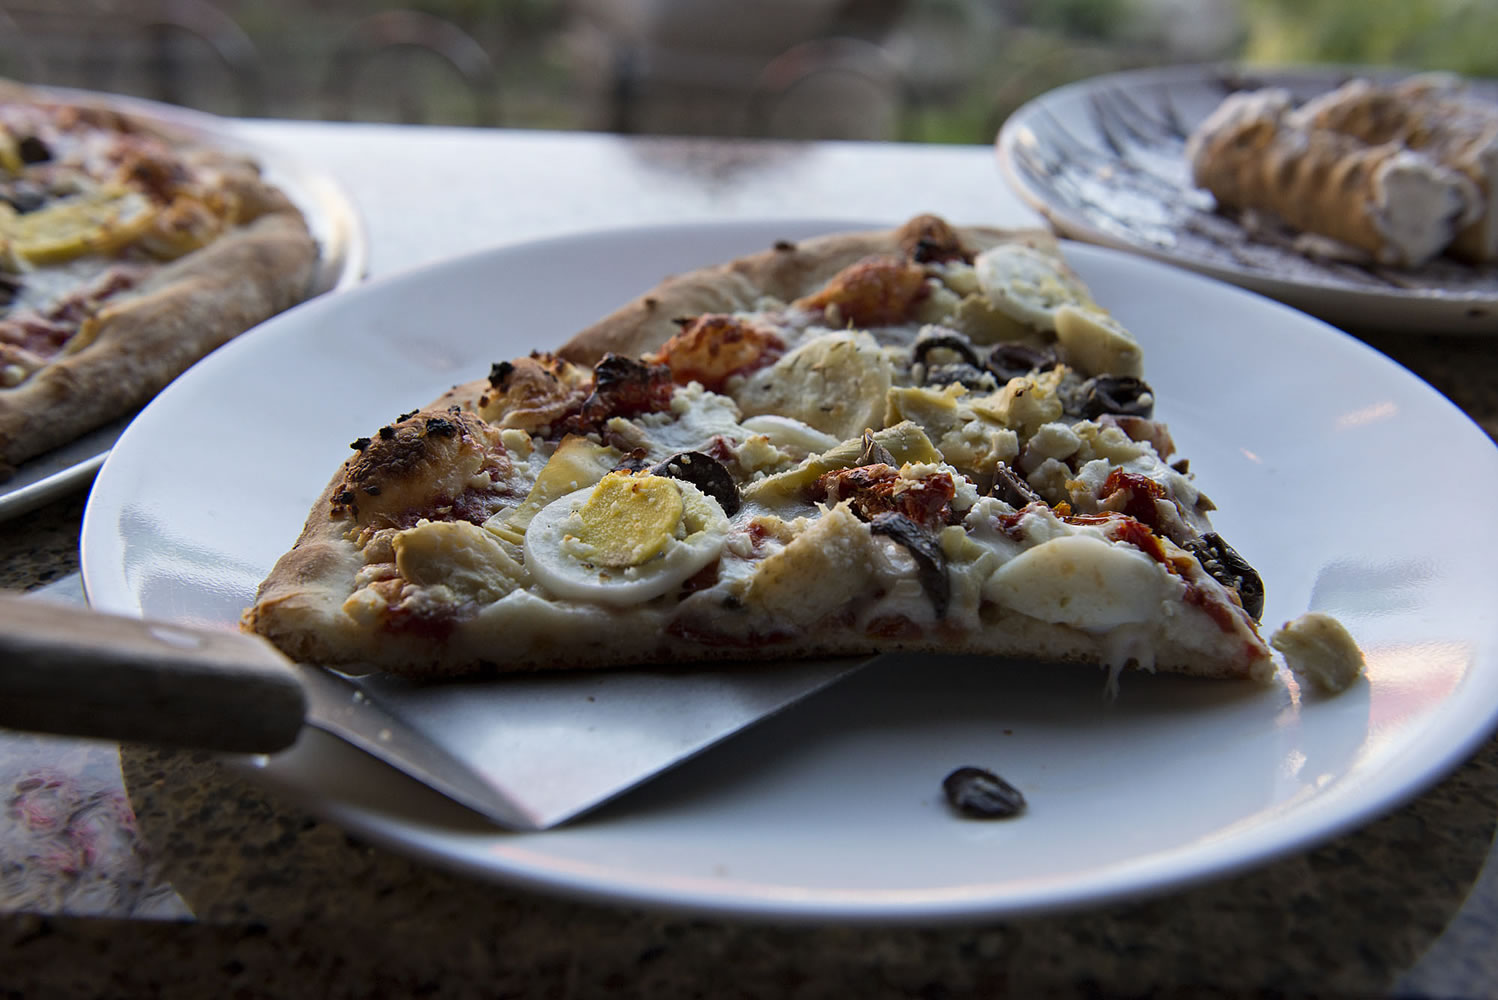 Two slices of Mediterranean pizza are served Nov. 3 next to a plate of cannoli at Vinnie&#039;s Pizza in downtown Vancouver.